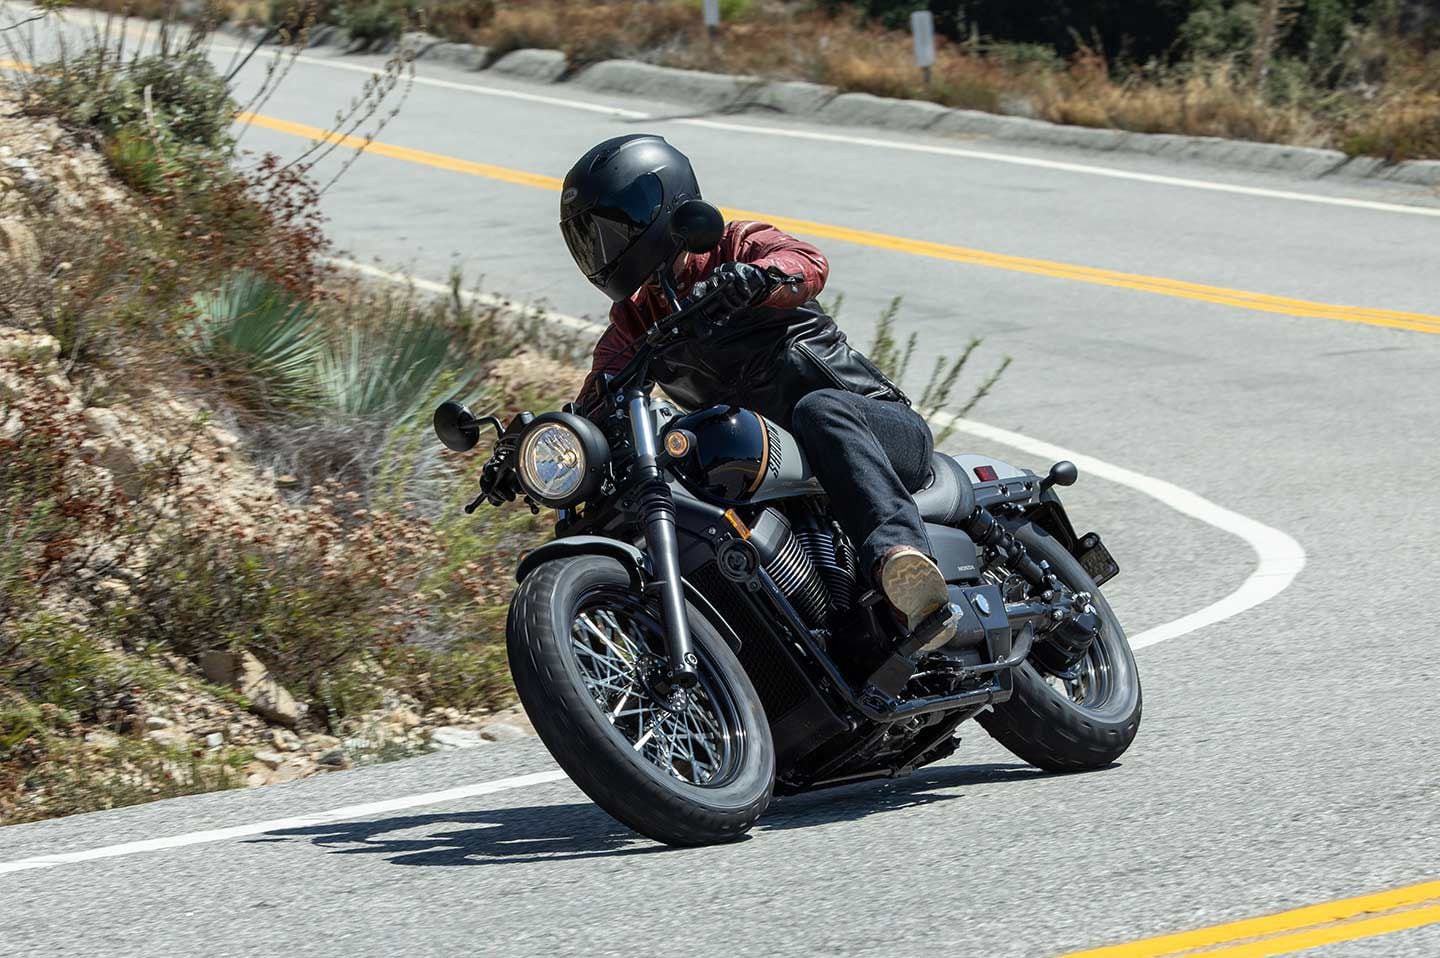 Honda’s Shadow Phantom provides a plush ride, and good handling, from its lightweight package.